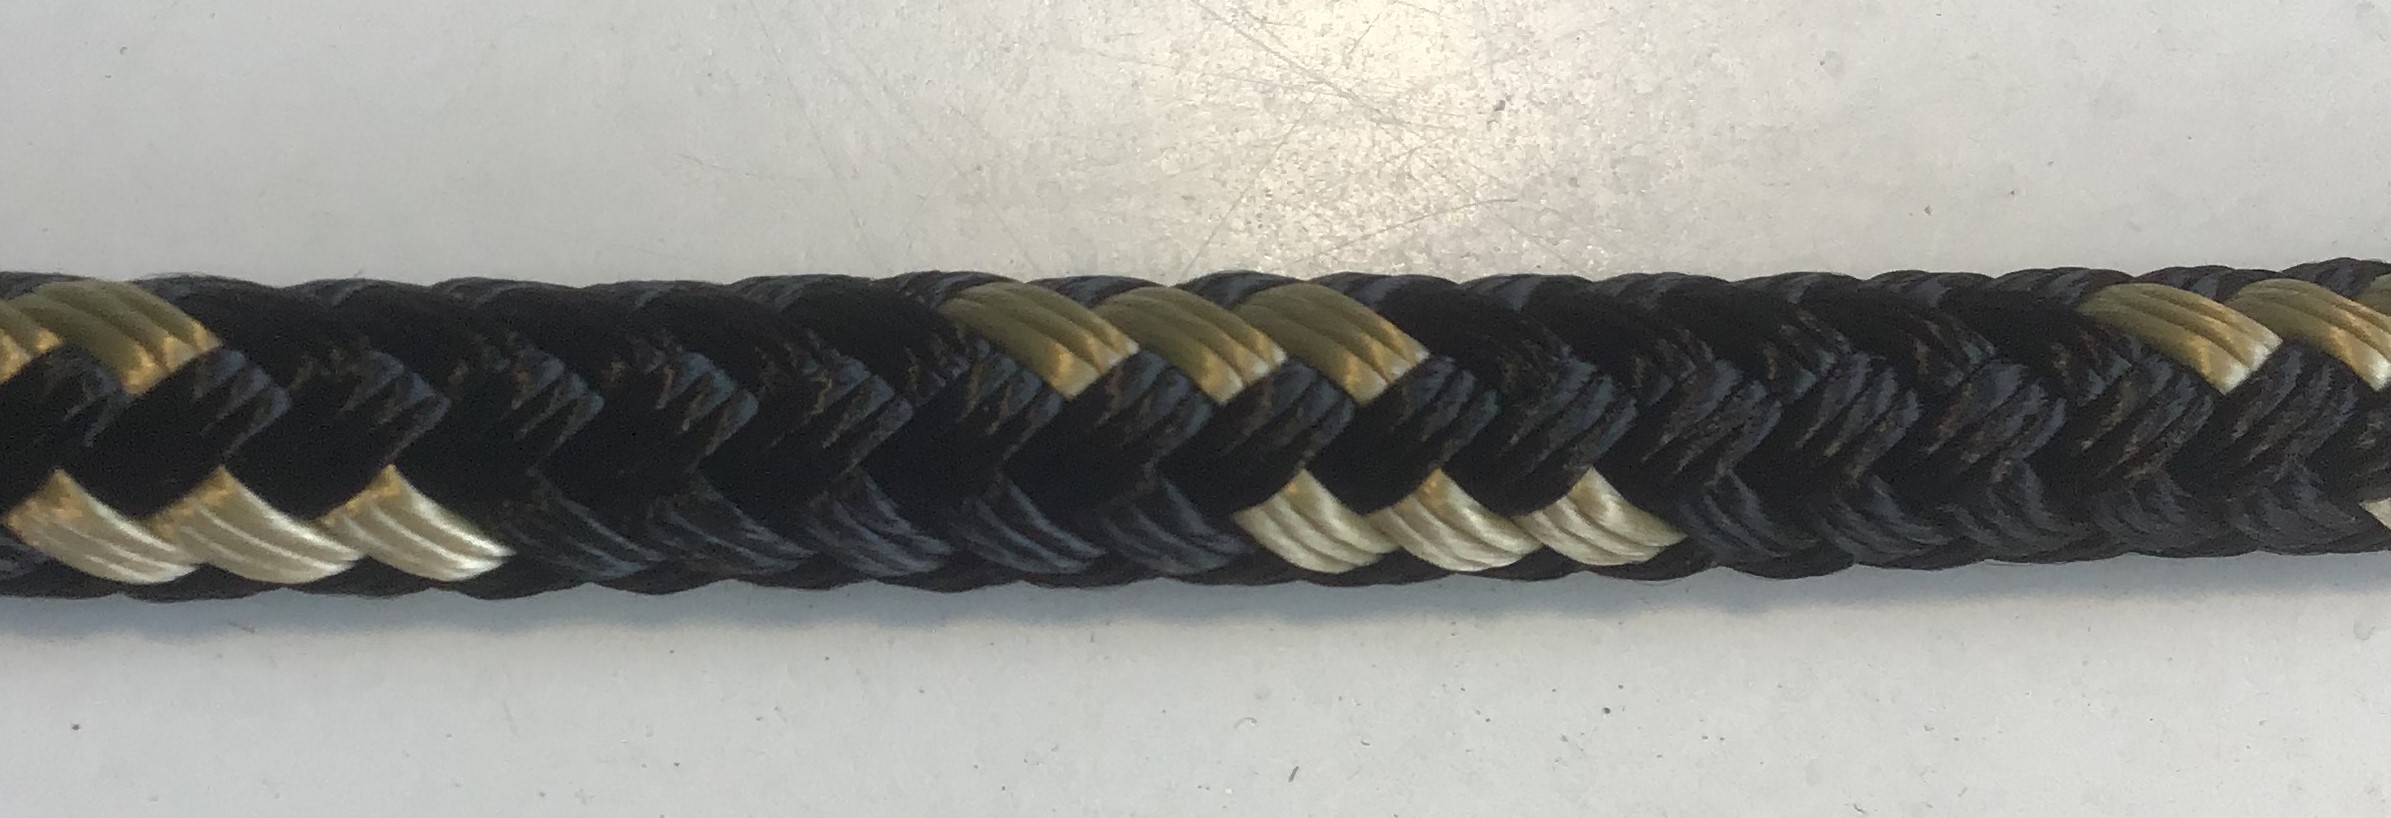 3/4" X 20' NYLON DOUBLE BRAID DOCK LINE - BLACK with GOLD - Click Image to Close